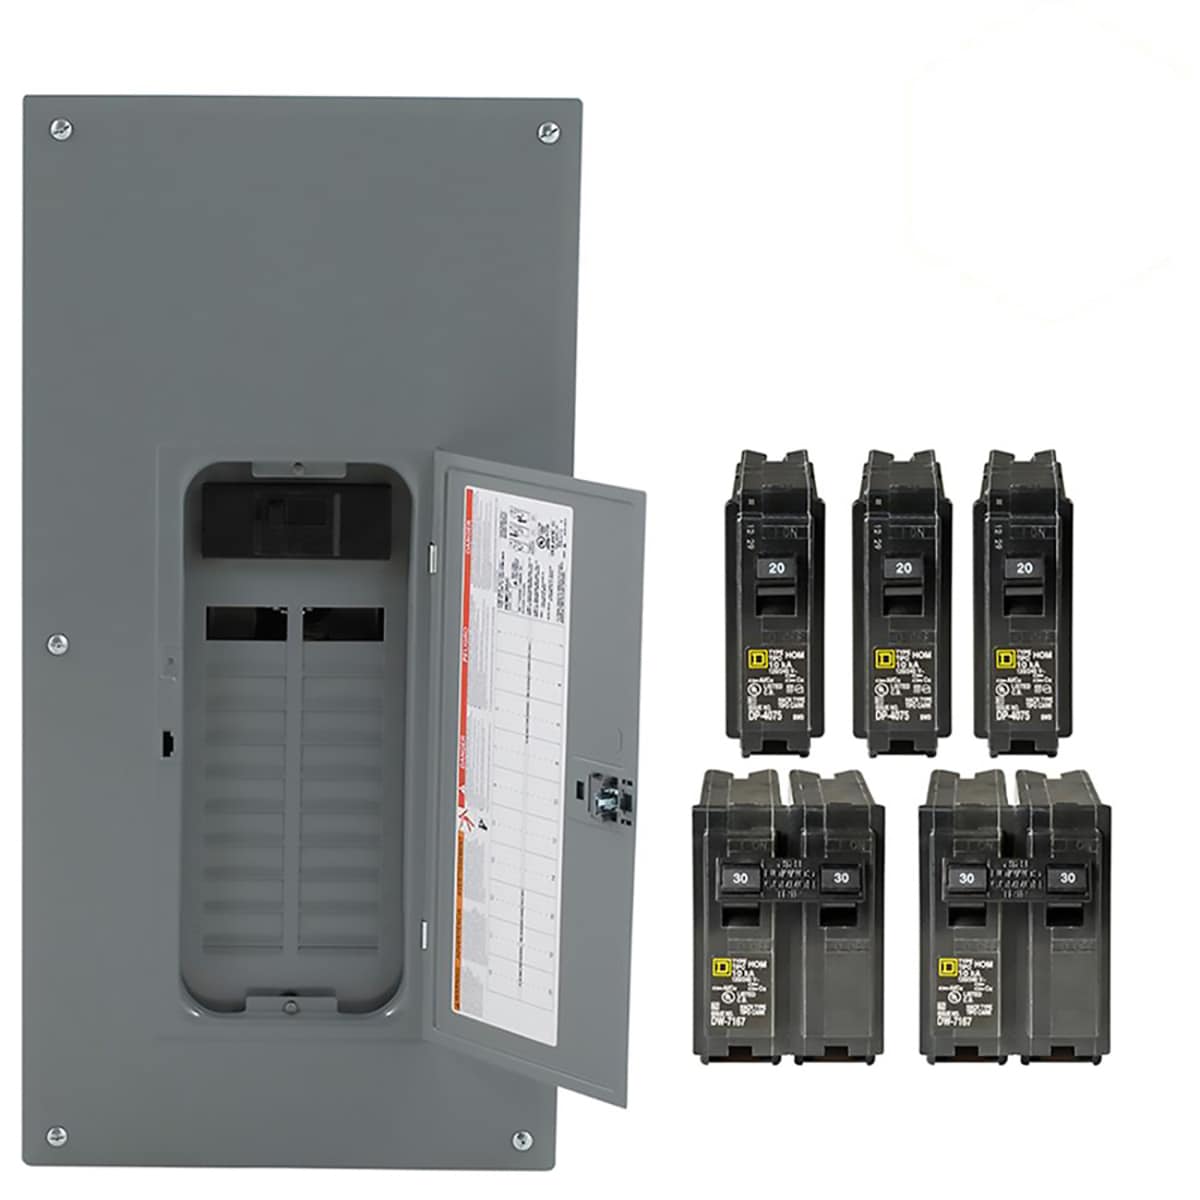 Square D 200 Amp Load Center Main Breaker Panel Electrical 40 Circuit 20 Space